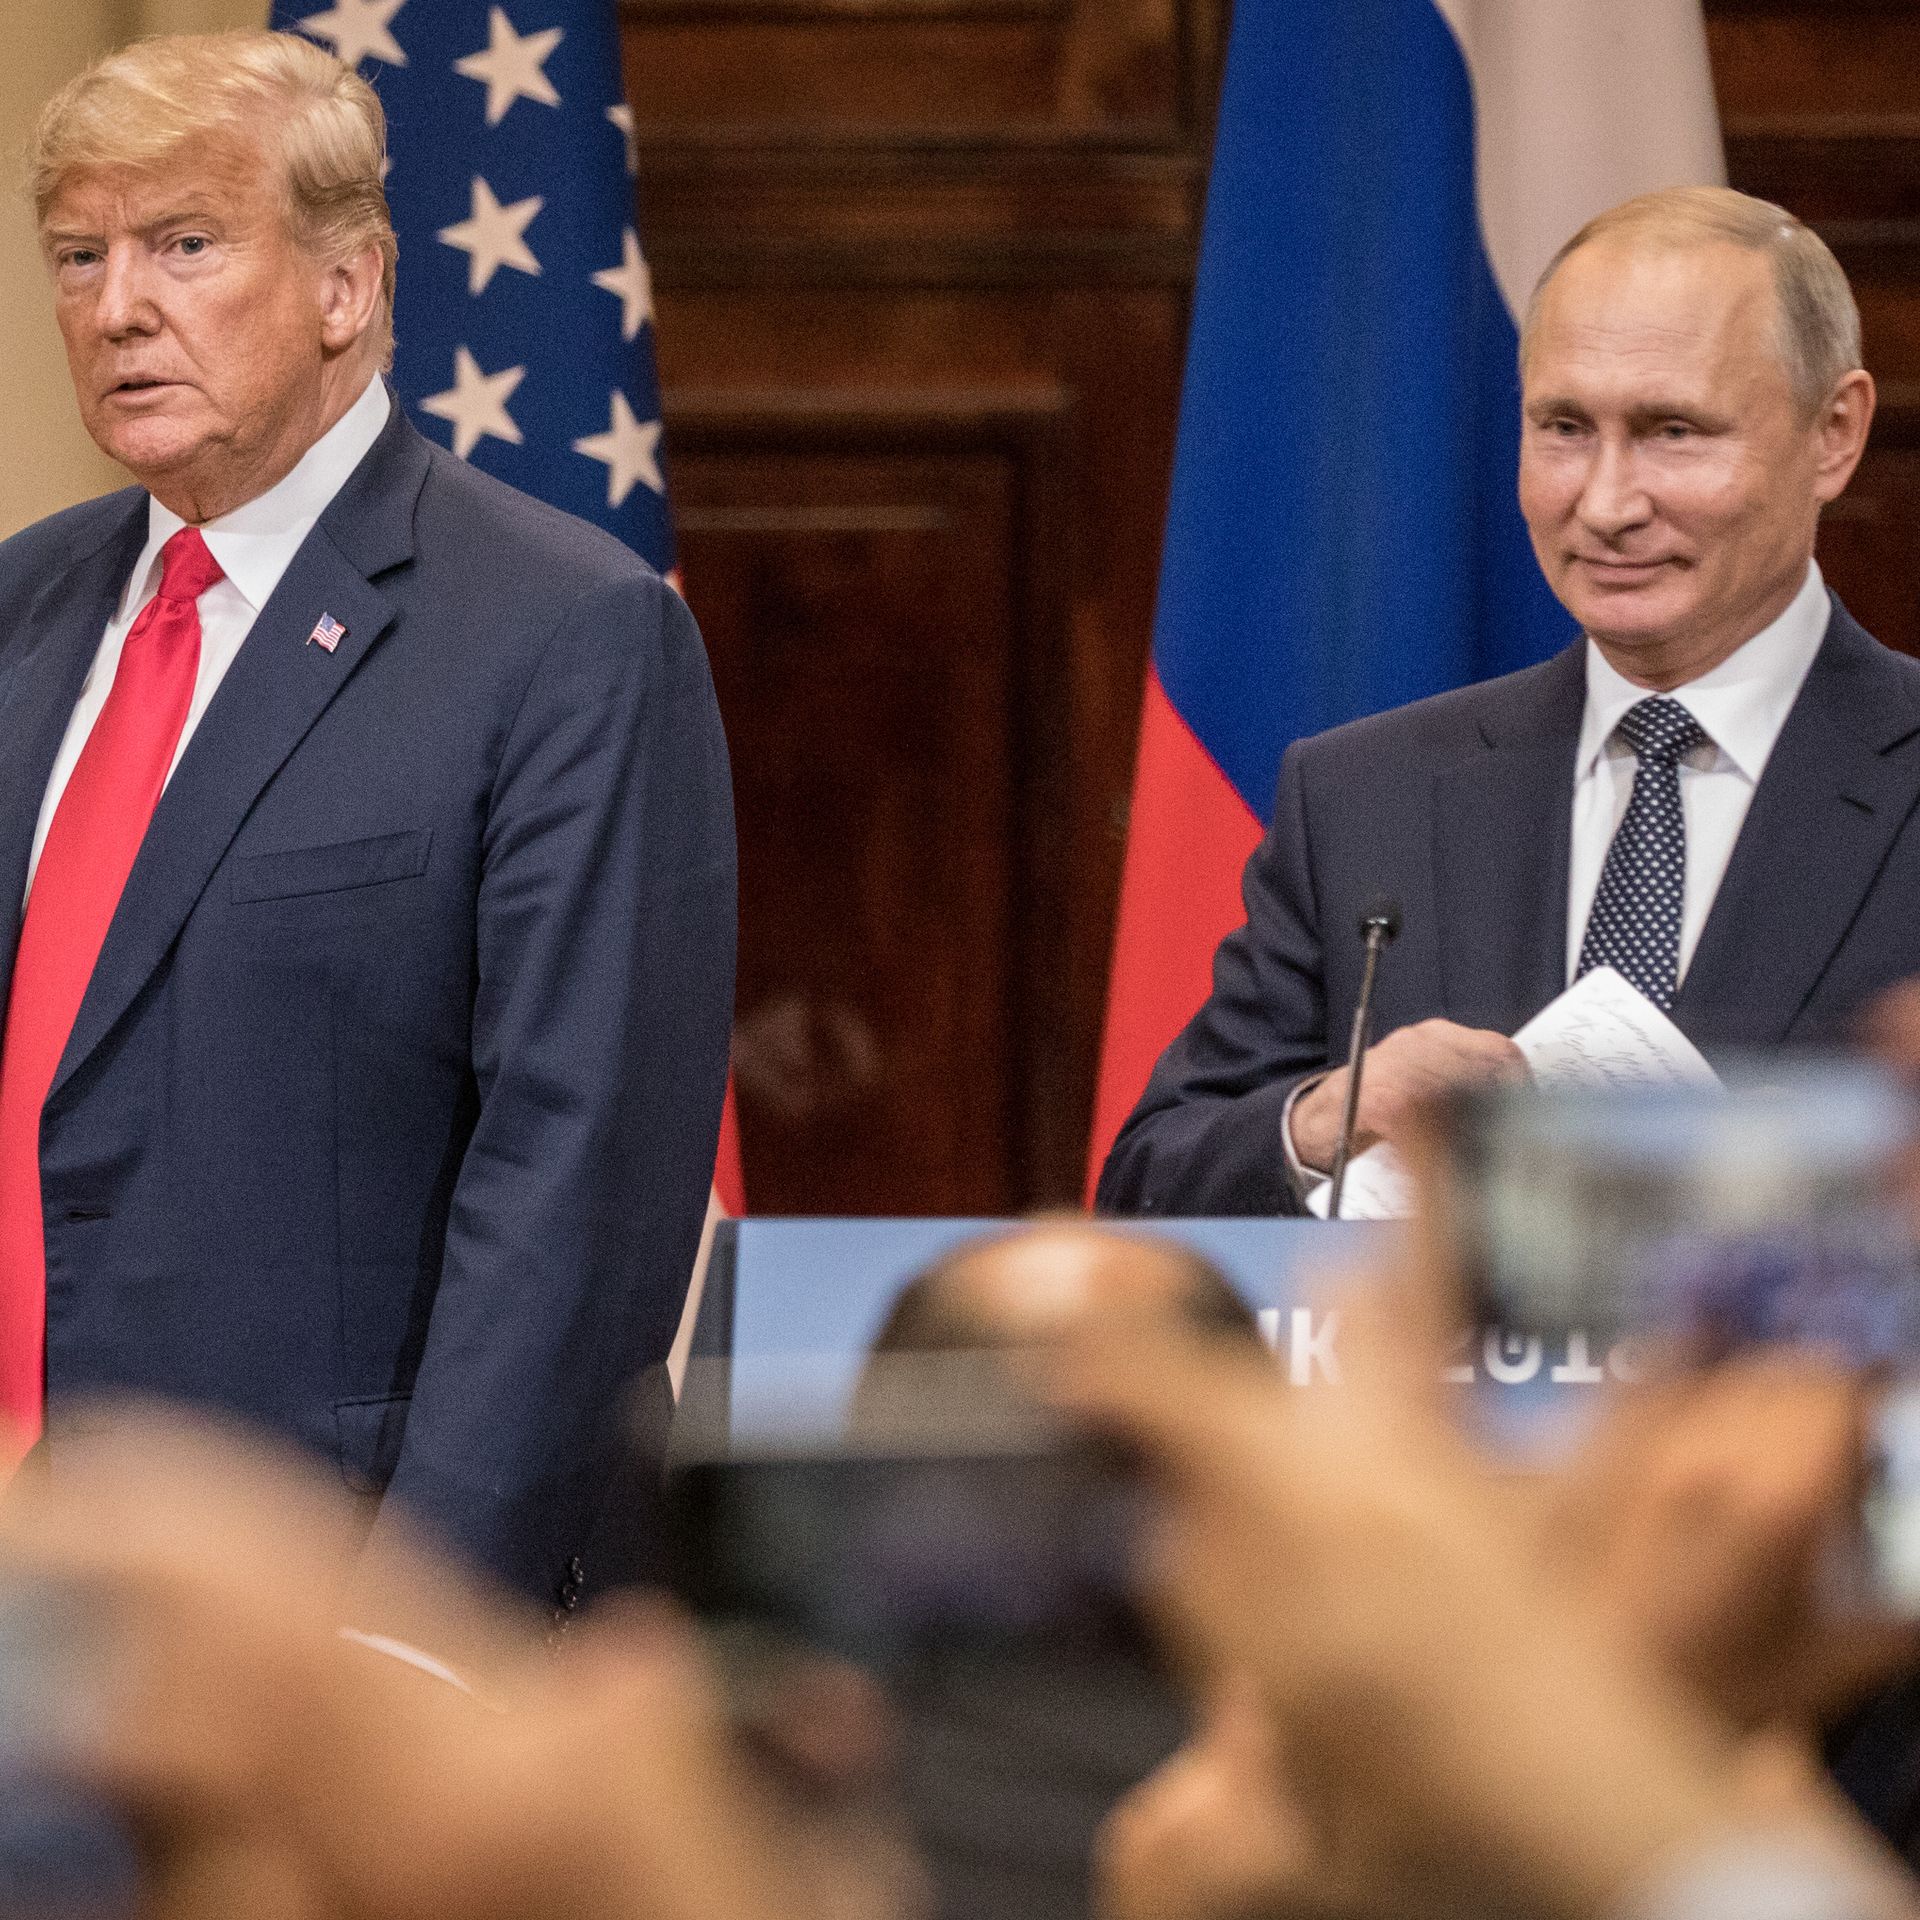 President Trump and Russian President Vladimir Putin during a joint press conference after their summit on July 16, 2018, in Helsinki, Finland.